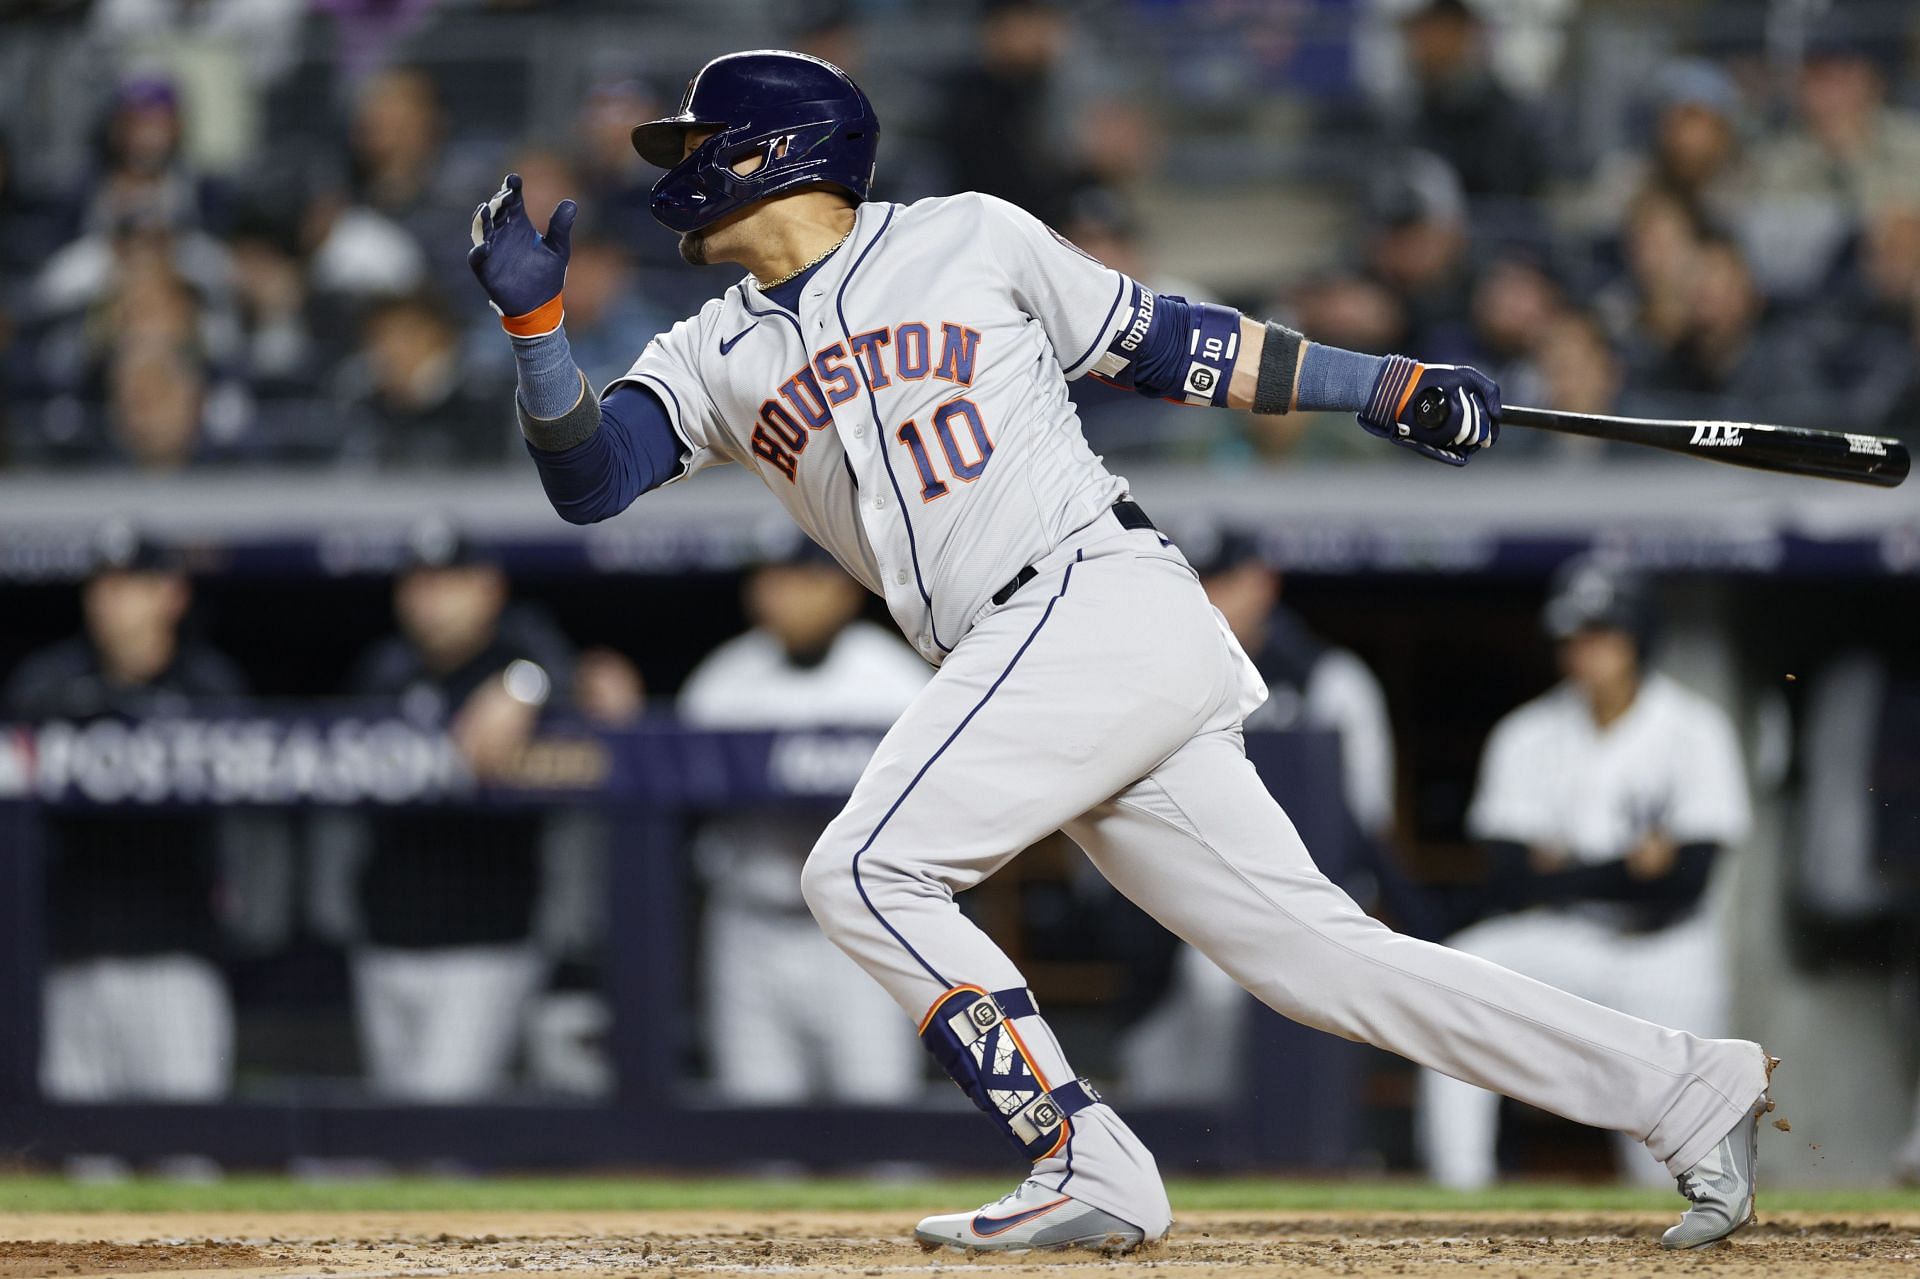 Yuli Gurriel may not have a Houston home anymore